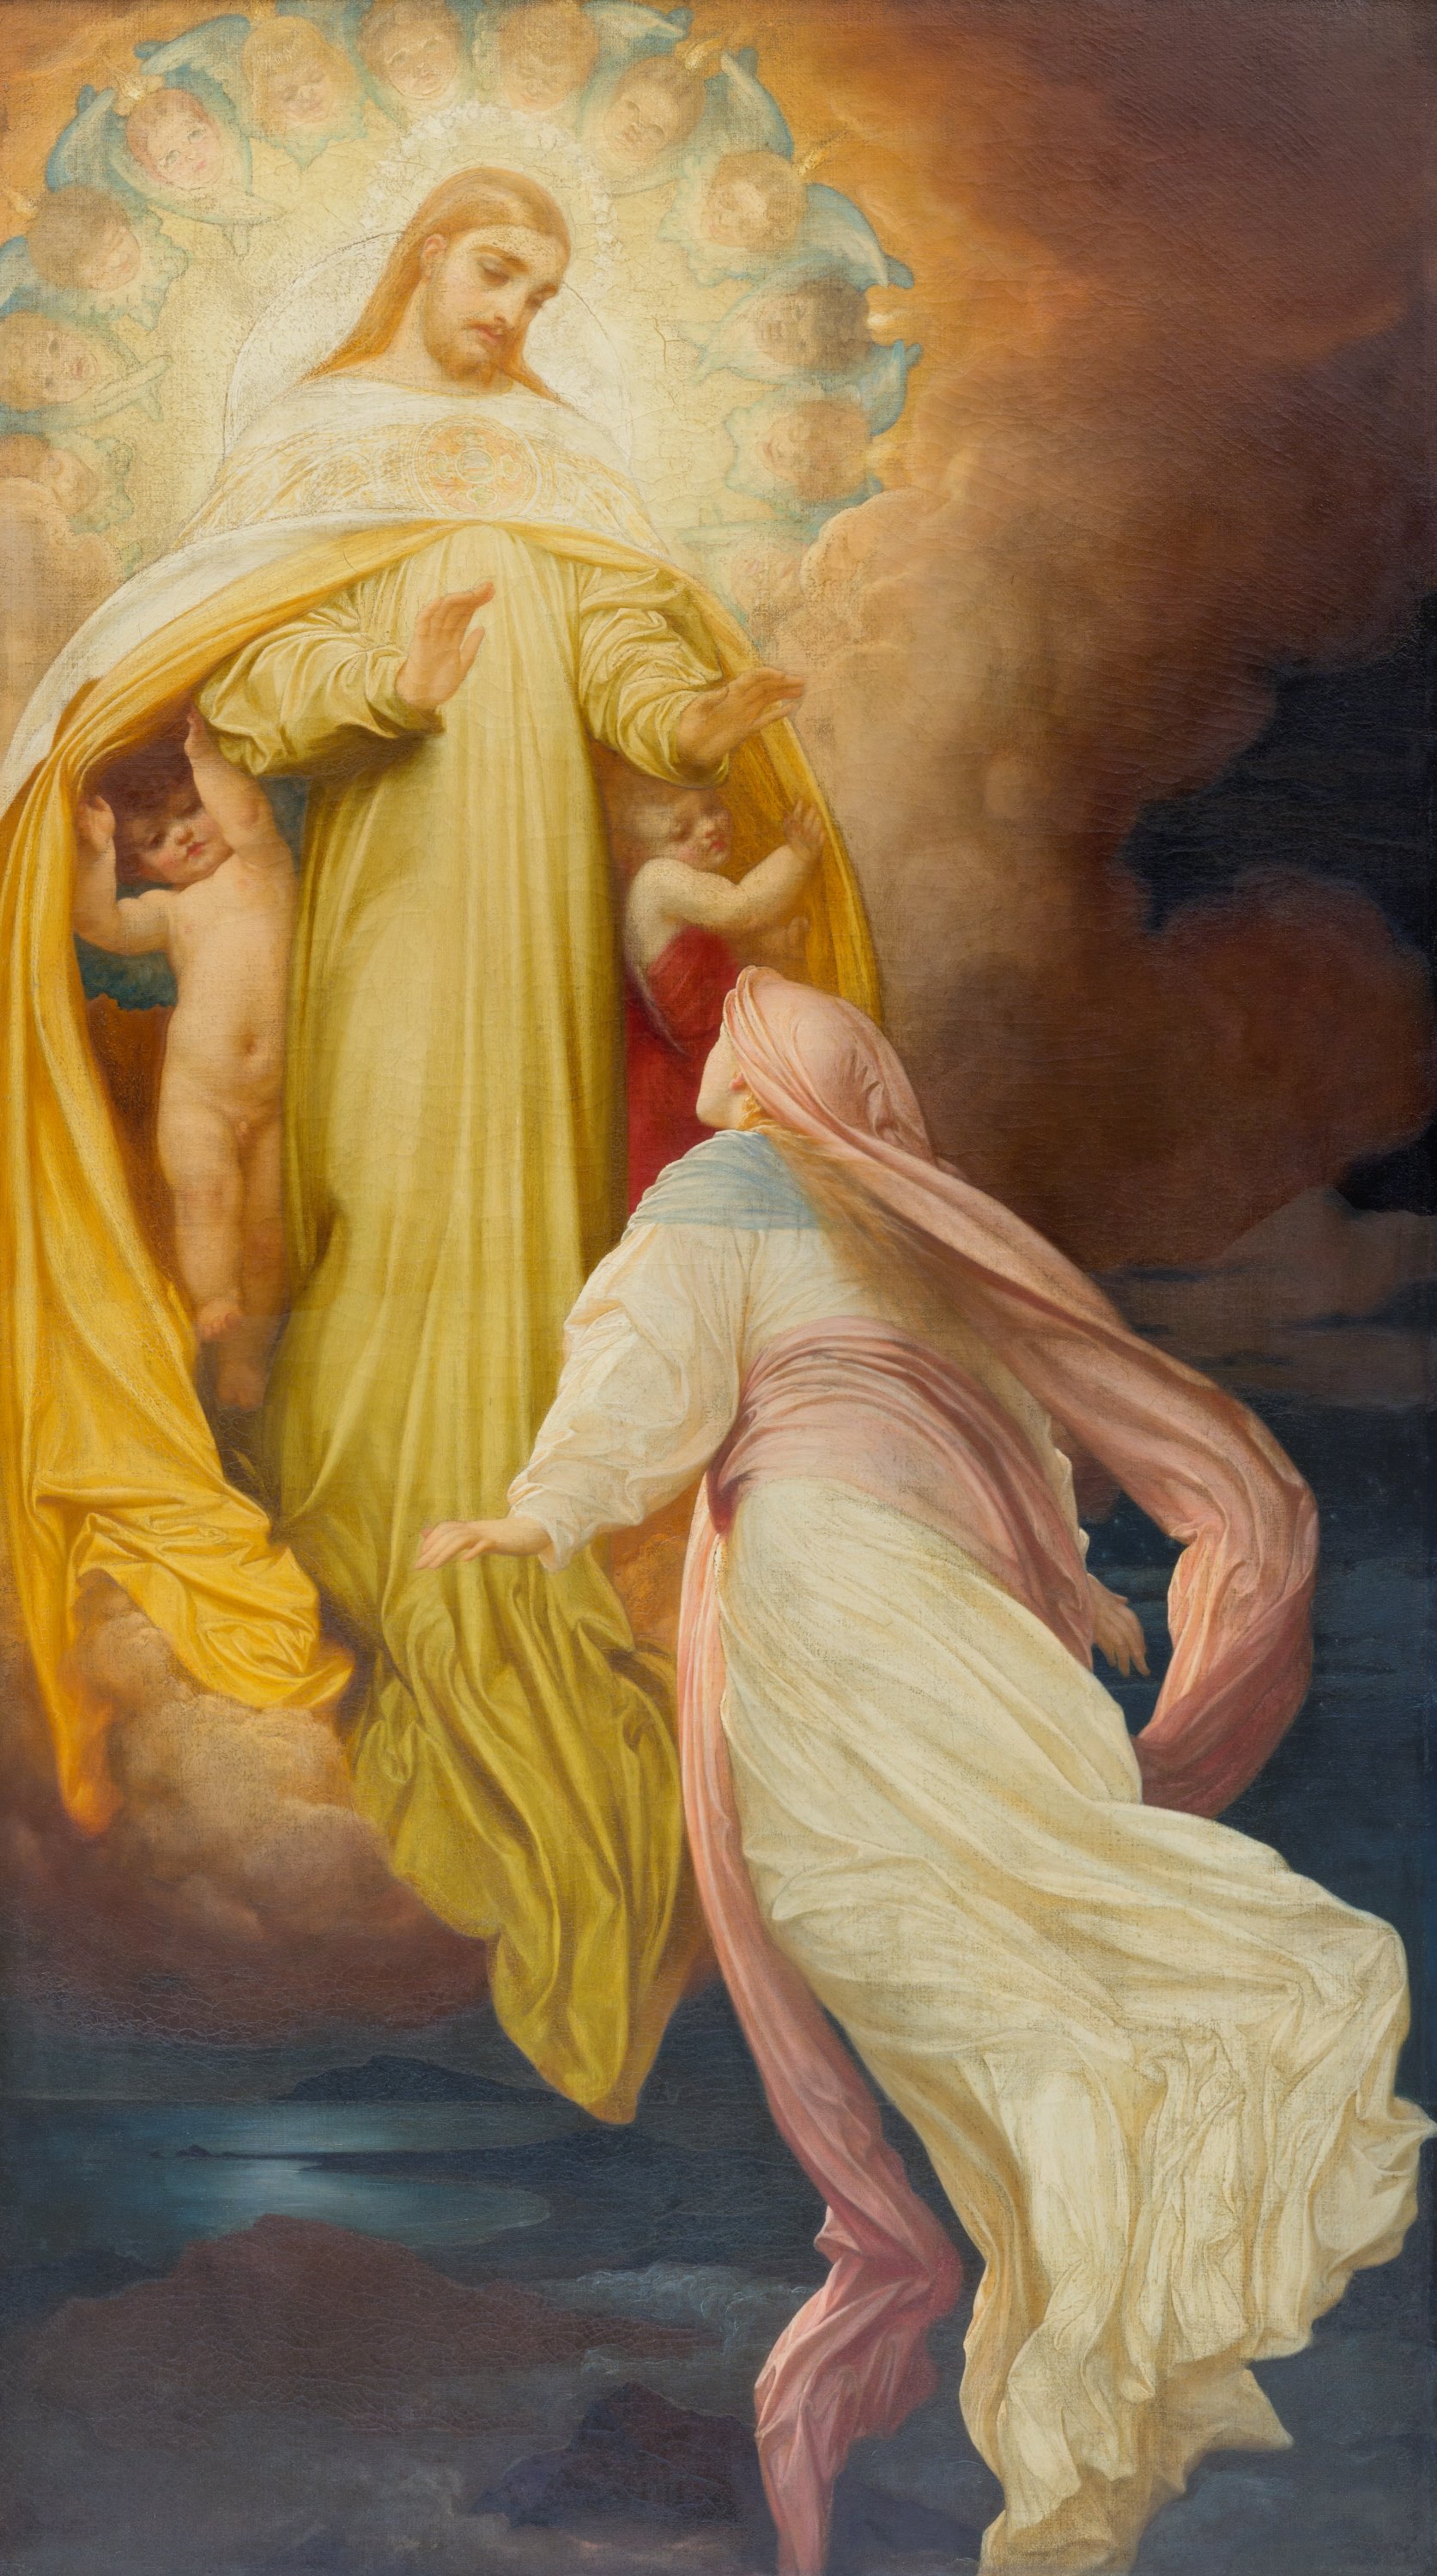 <p><strong>Frederic Leighton</strong><br />
<em>A Dream</em> 1859&ndash;1860<br />
Mackelvie Trust Collection, Auckland Art Gallery Toi o Tāmaki, purchased 1925</p>